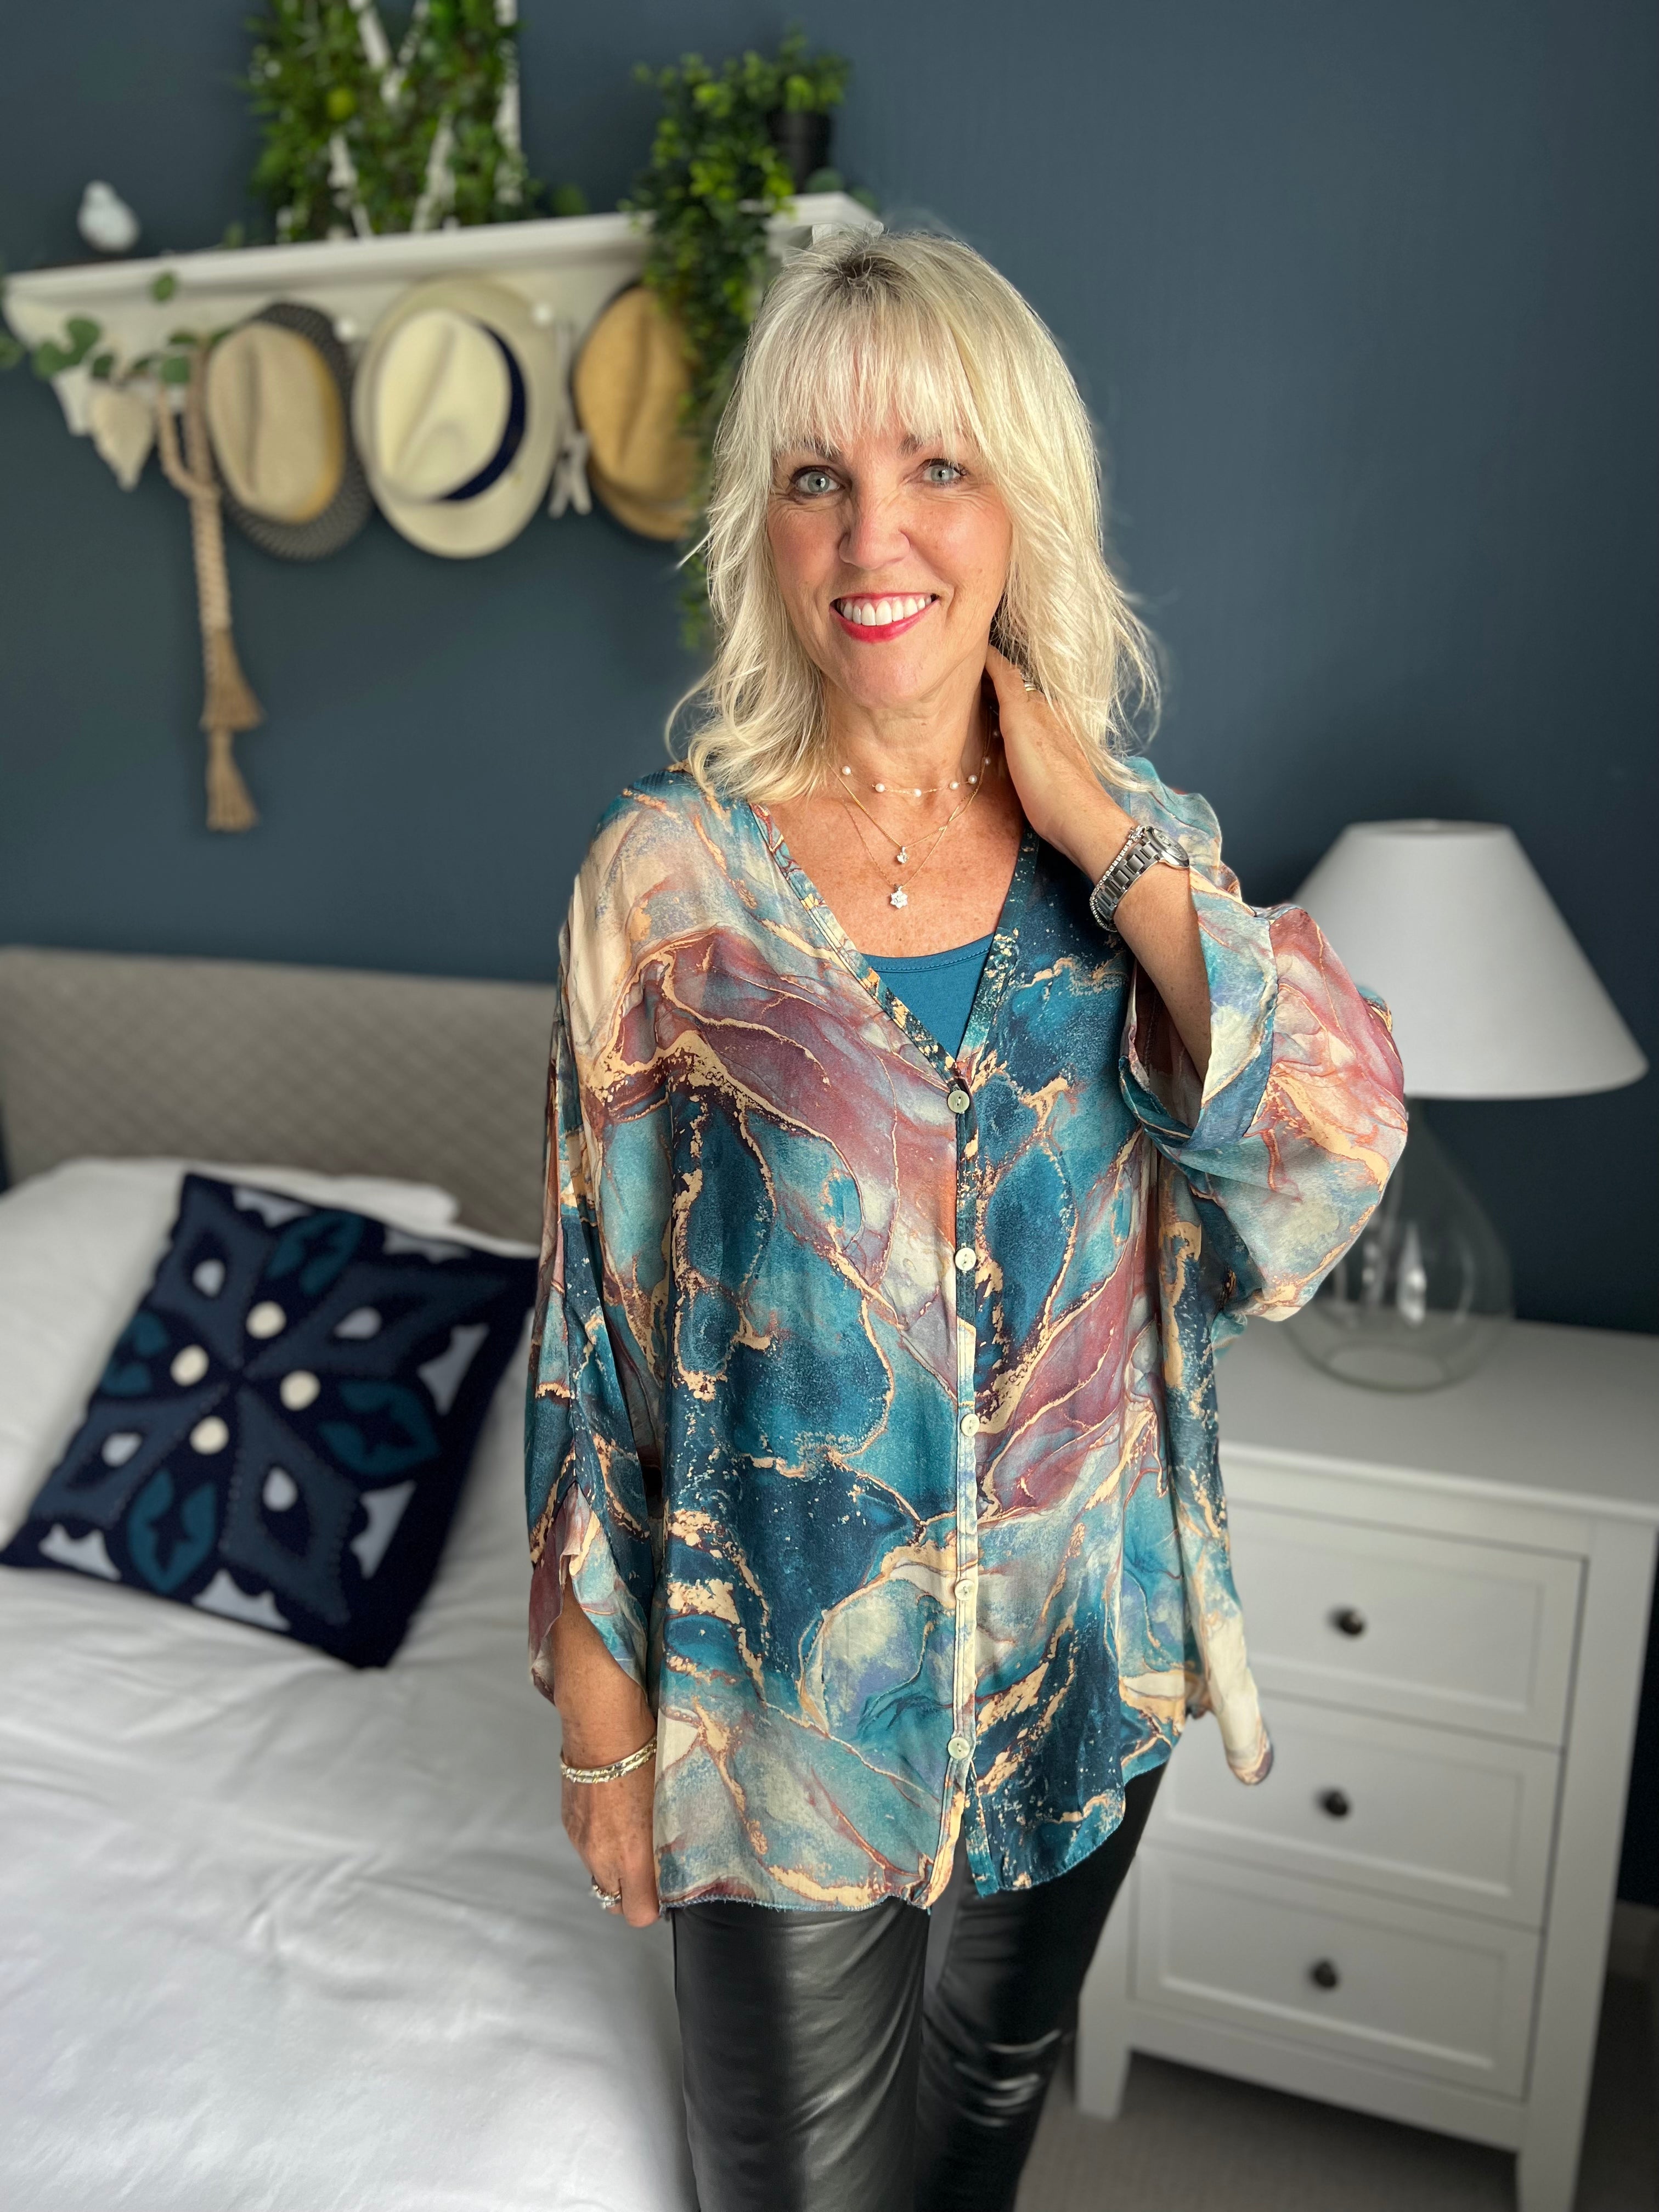 Silk Blouse & Cami in Shades of Teal